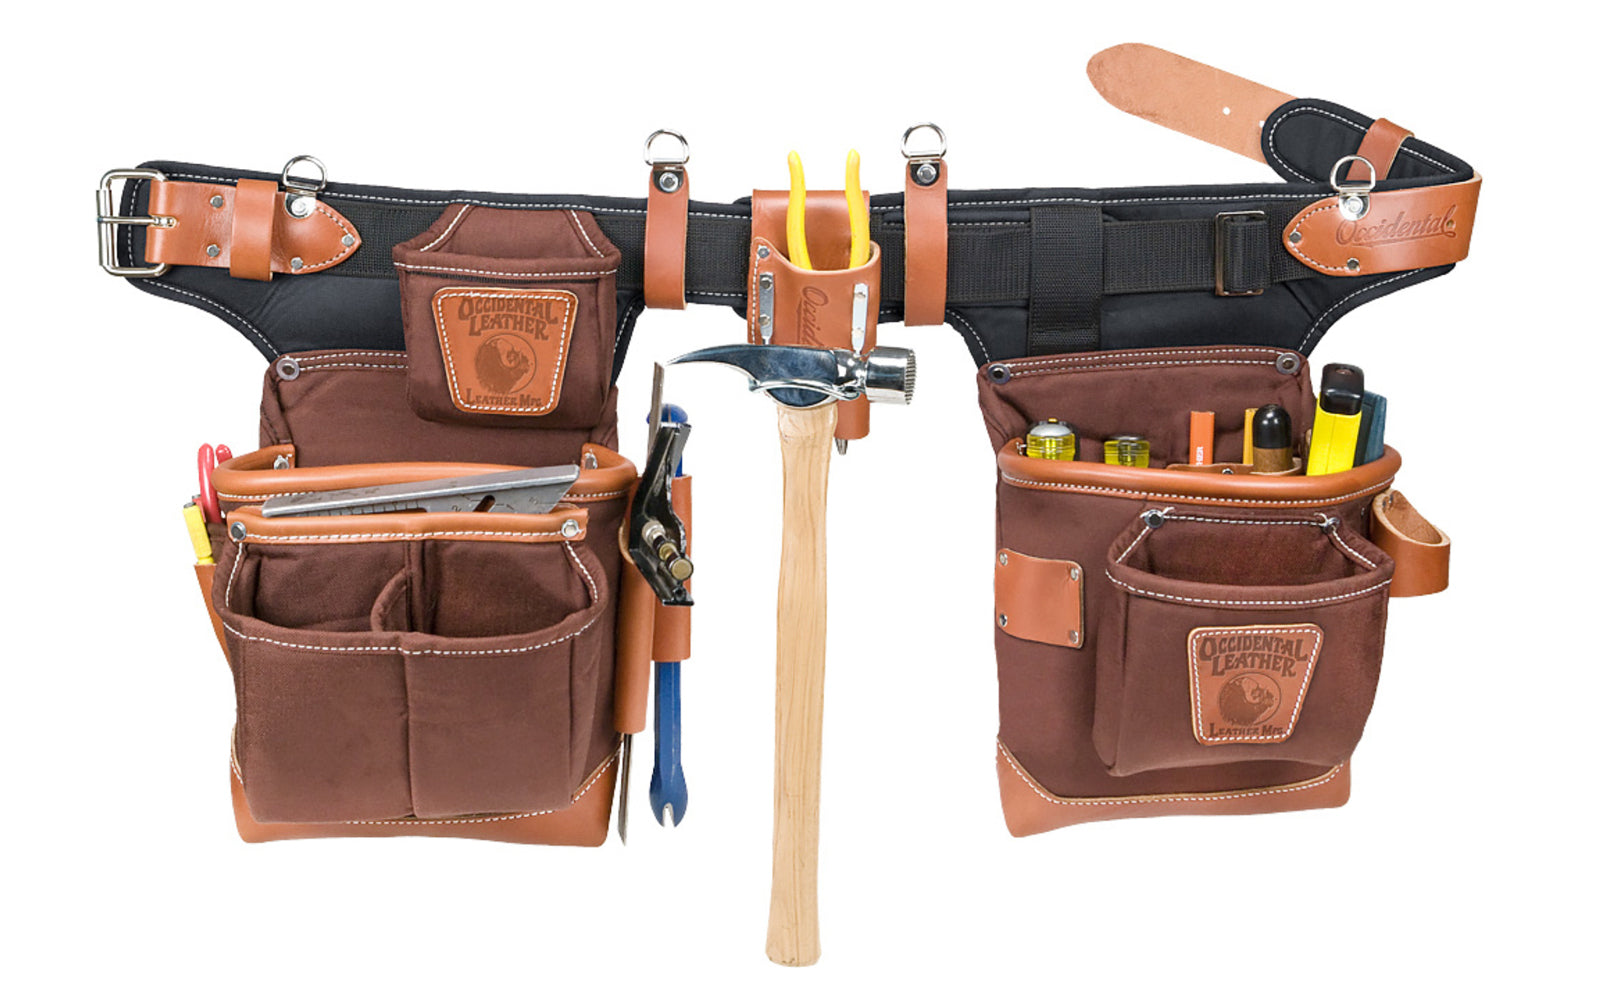 Occidental Leather Heritage "Adjust-To-Fit" FatLip Tool Belt Set - Cafe Color Package Set ~ 9855 - Padded Two Ply Tool Bags Keep Shape - 24 pockets - Fully Adjustable - Contracts to 32” Pant (35” Belt), Expands to 41” Pant (45” Belt). 759244245301. Extremely Abrasion Resistant Industrial Nylon material. Made in USA